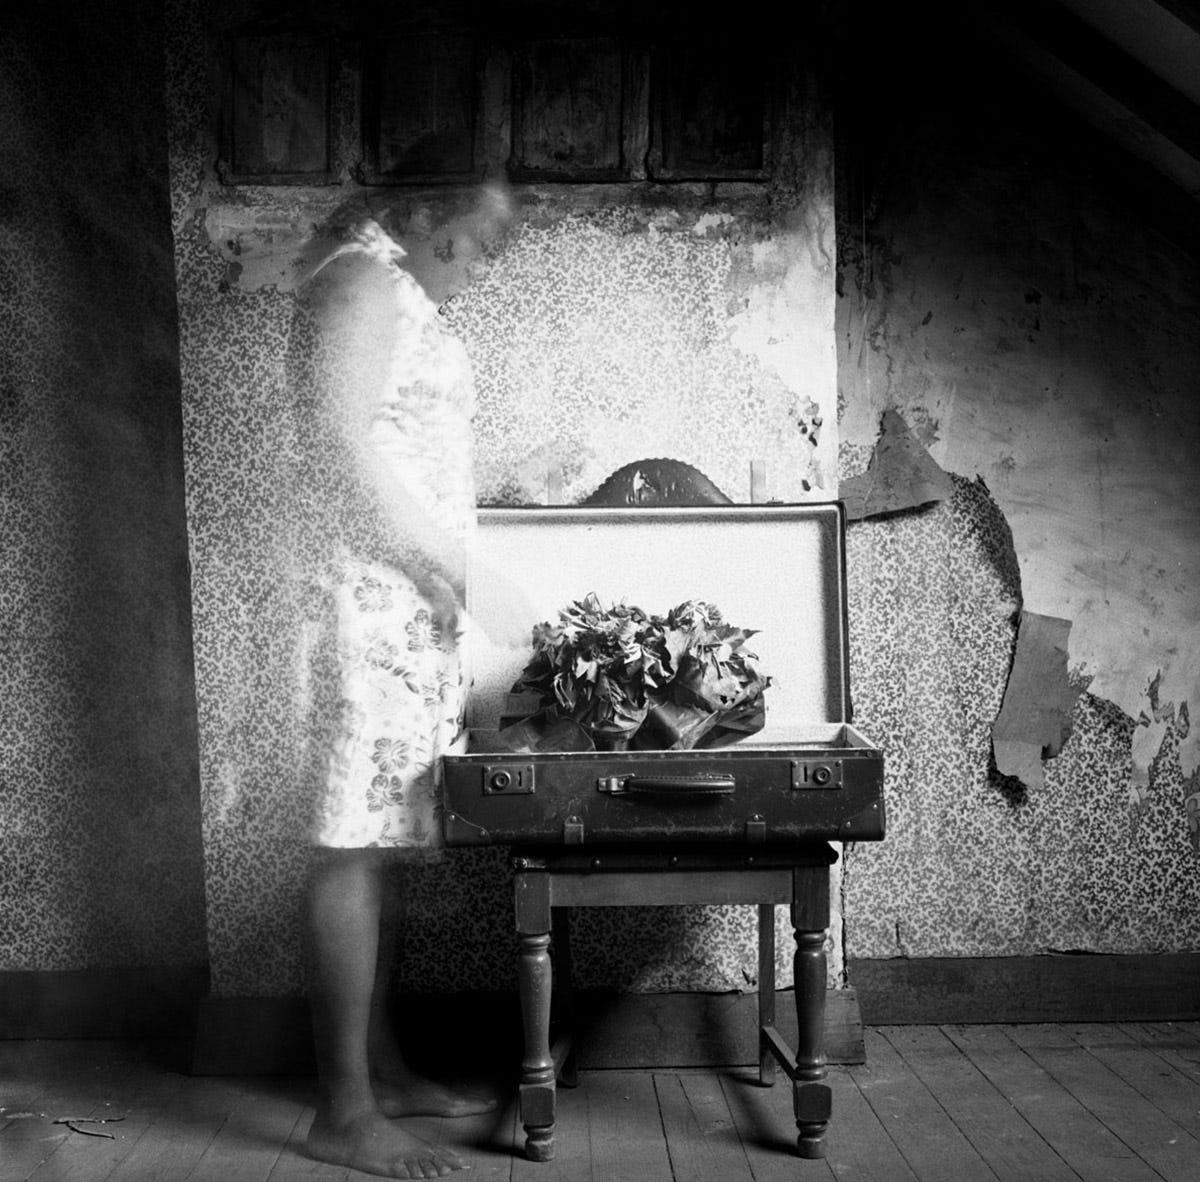 Black and white photo which is an autoportait of Hélène Amouzou, a Togolese artist, who uses this project to show her precarity during the decades long journey in obtaining her Belgian citizenship. In the photo she appears barefoot and ghost-like in a floral dress, in front of an open suitcase, in a sparsely decorated room with no carpet.